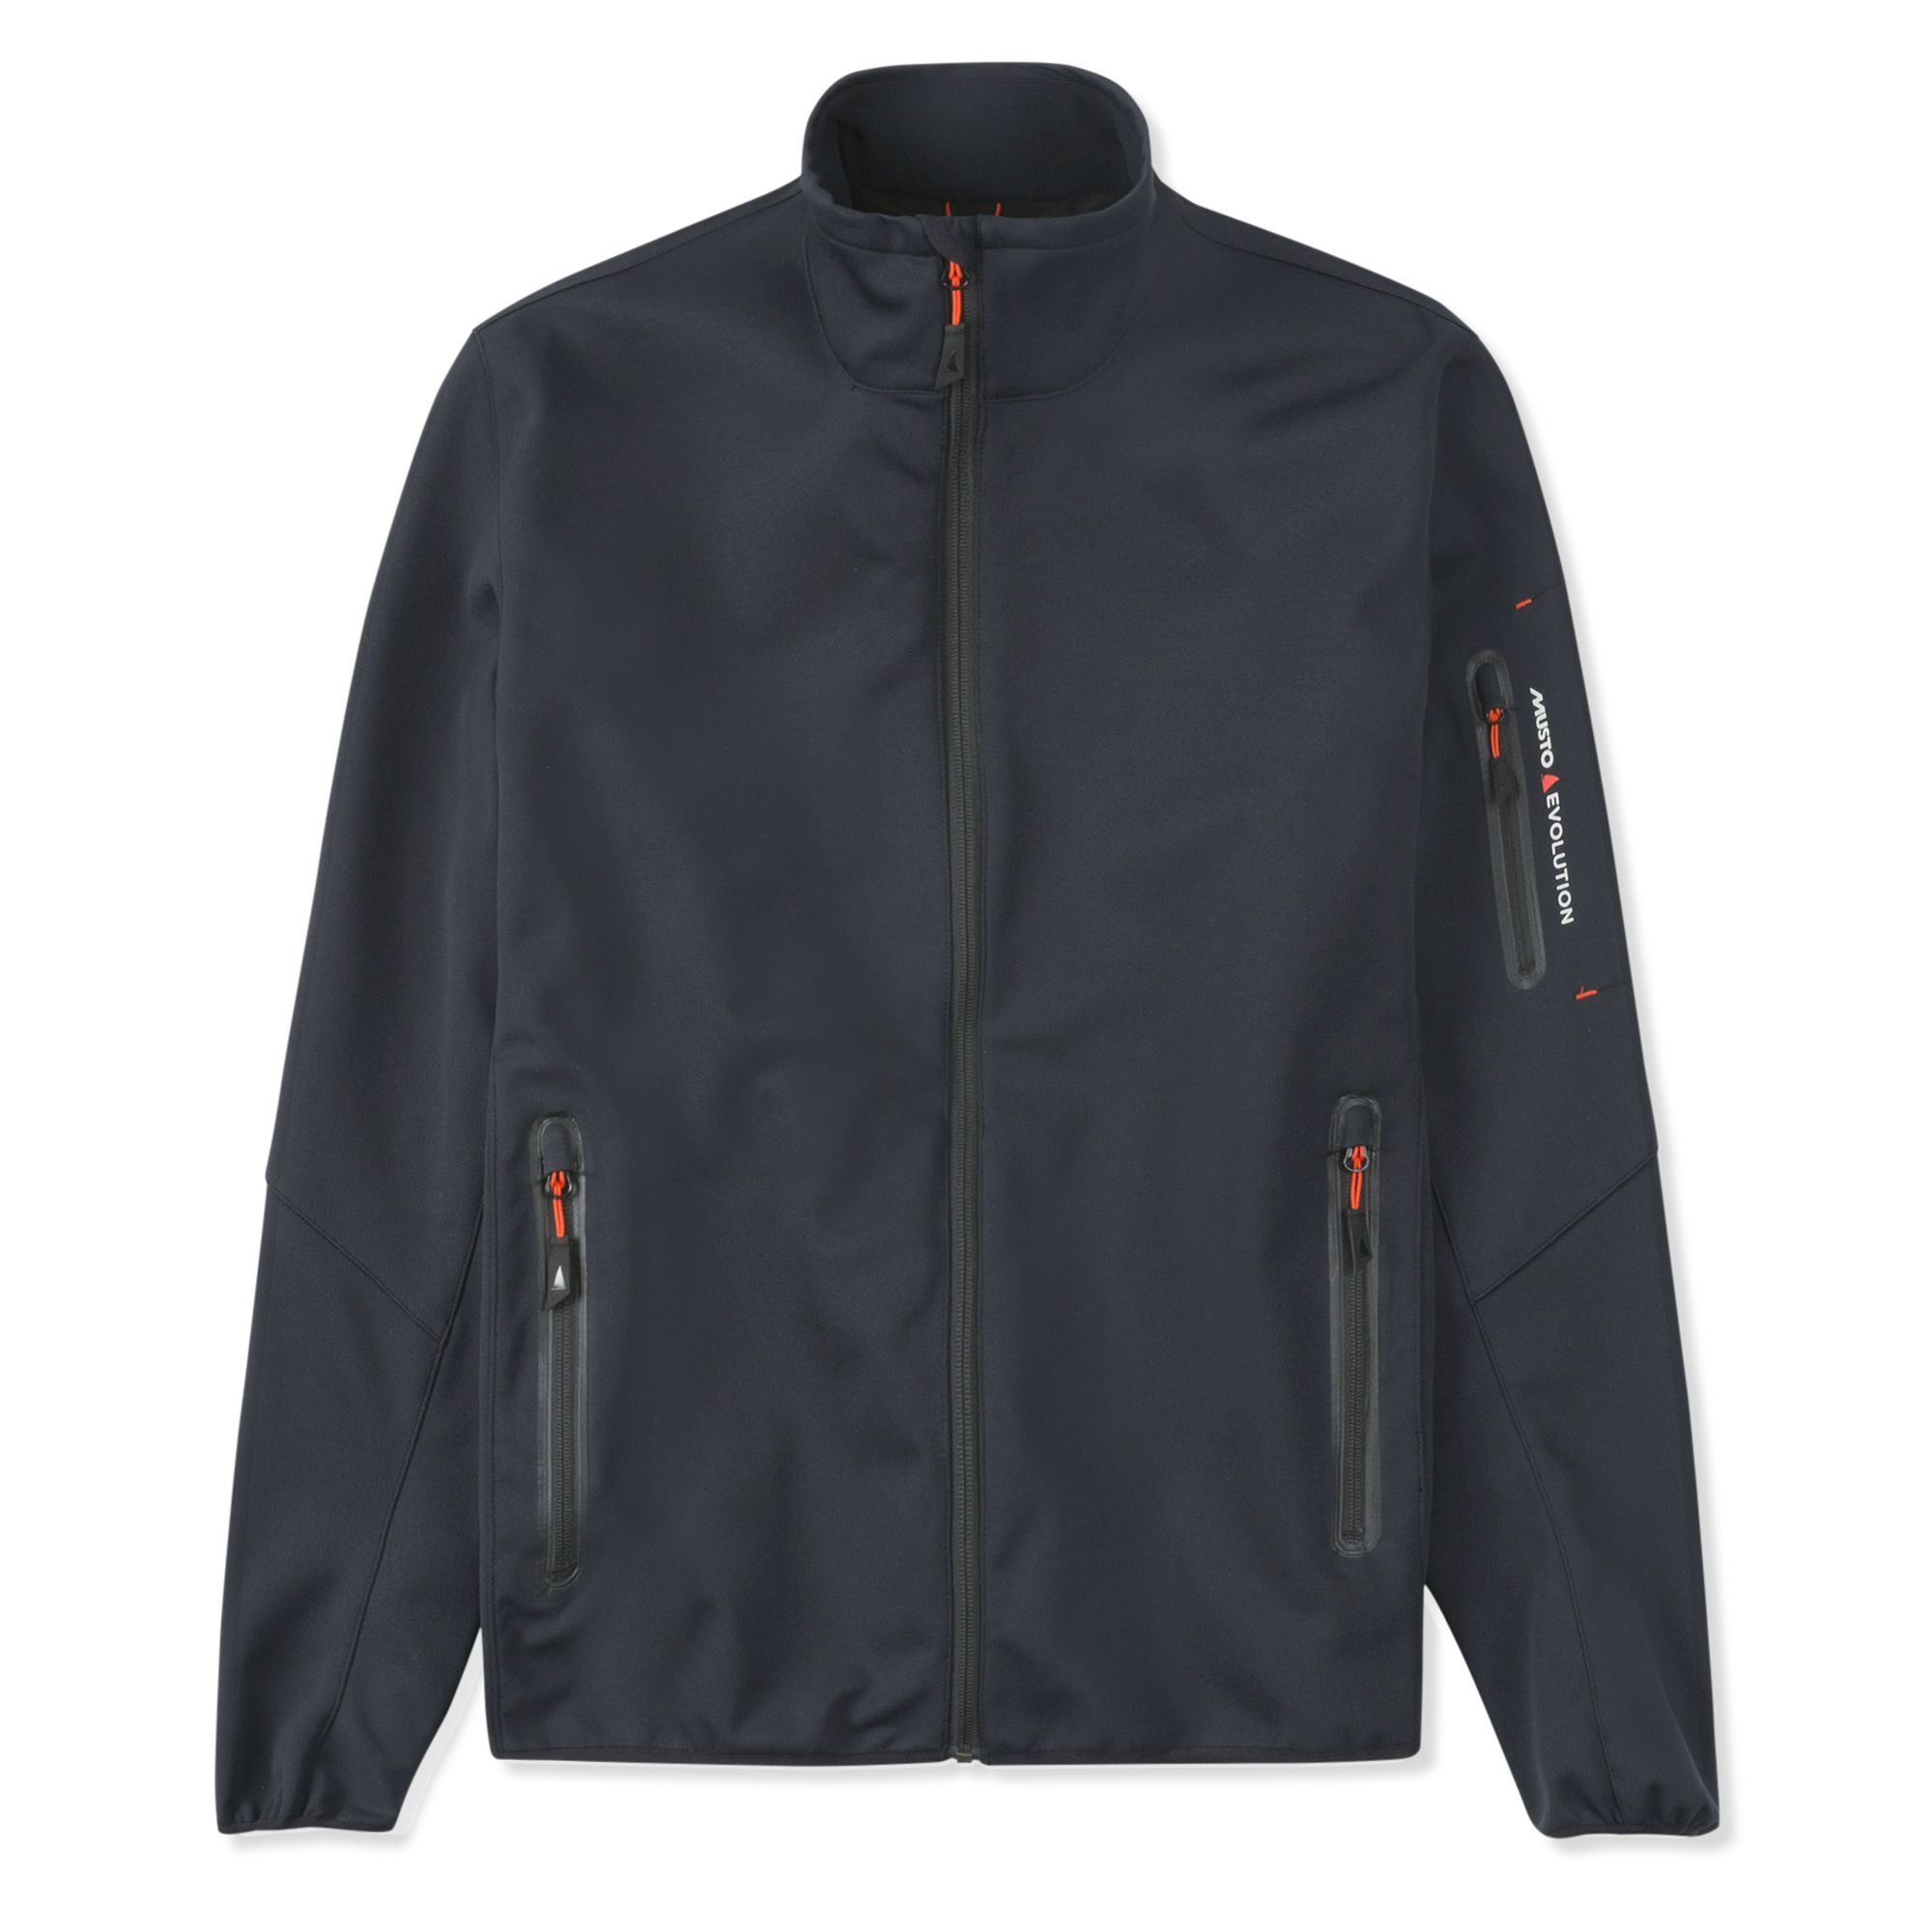 Crew Softshell Jacket by Musto